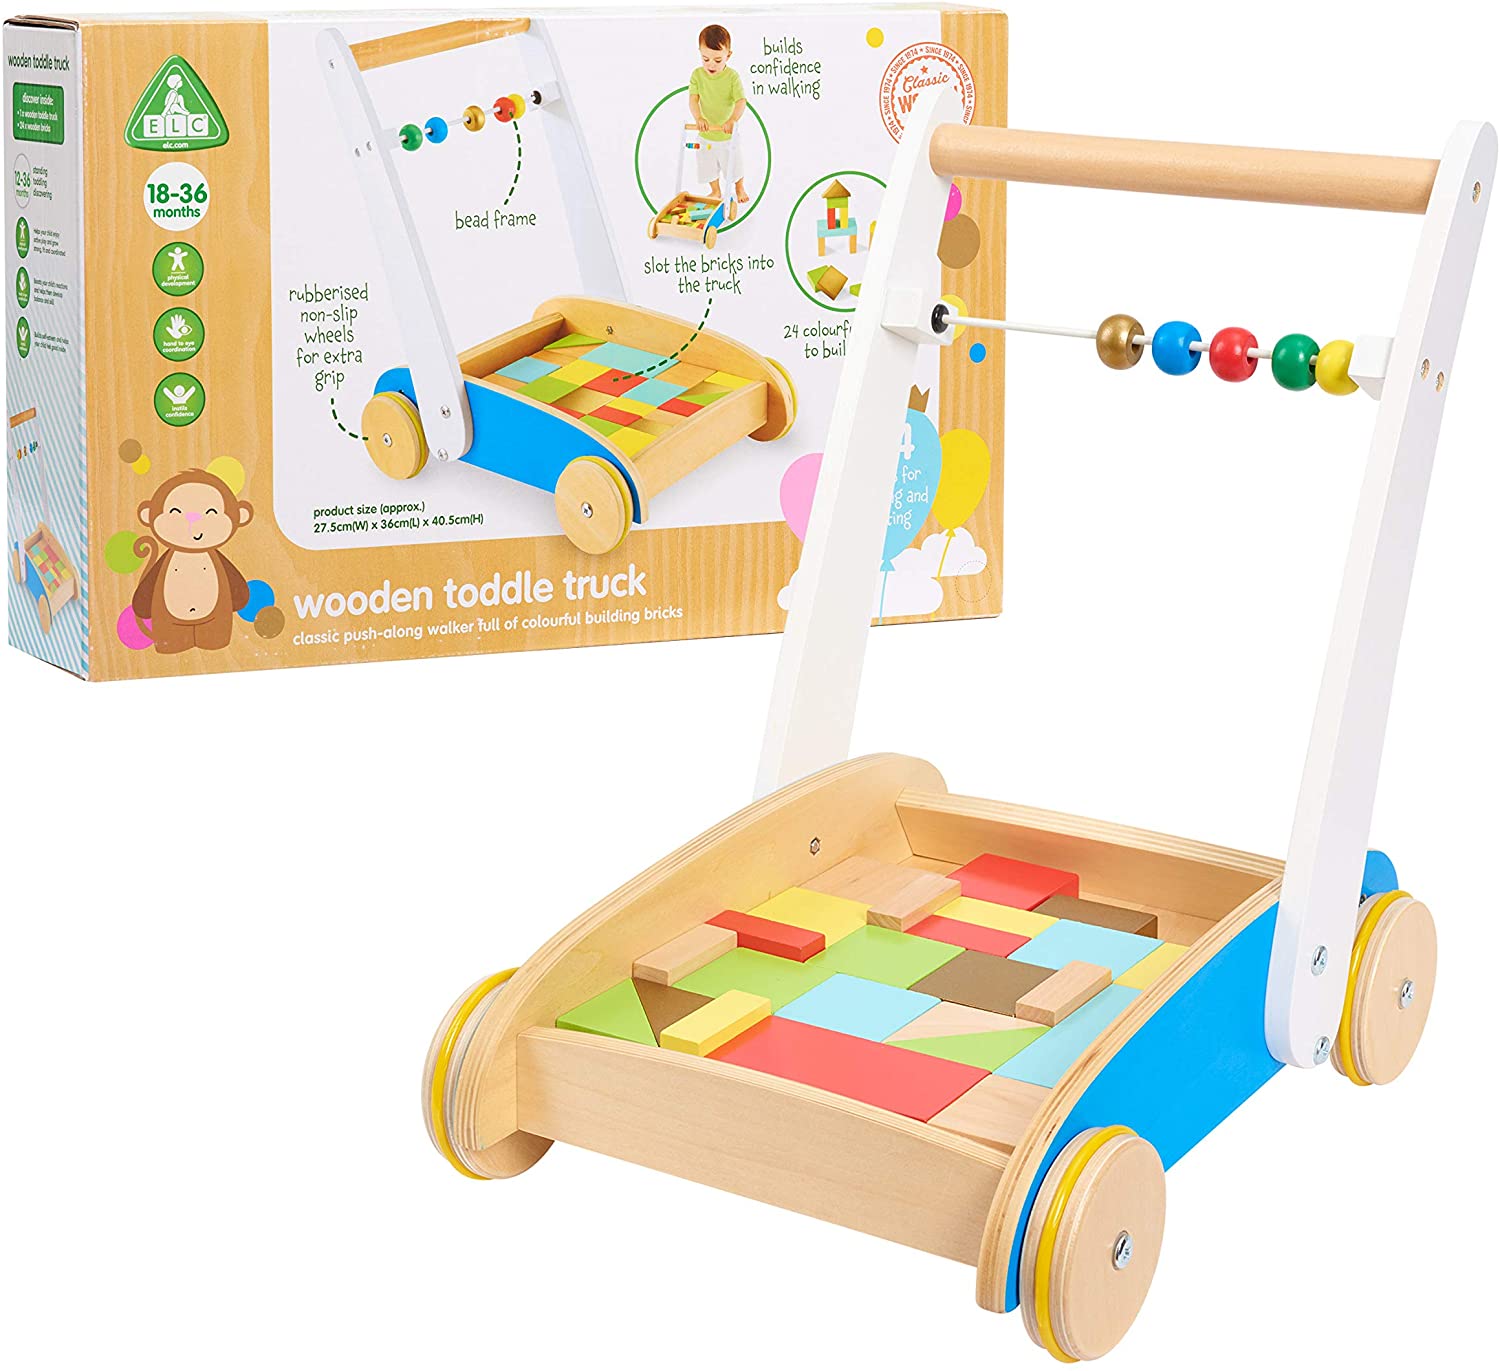 Early Learning Centre Wooden Toddle Truck $10.65 + Free Shipping w/ Amazon Prime or Orders $25+